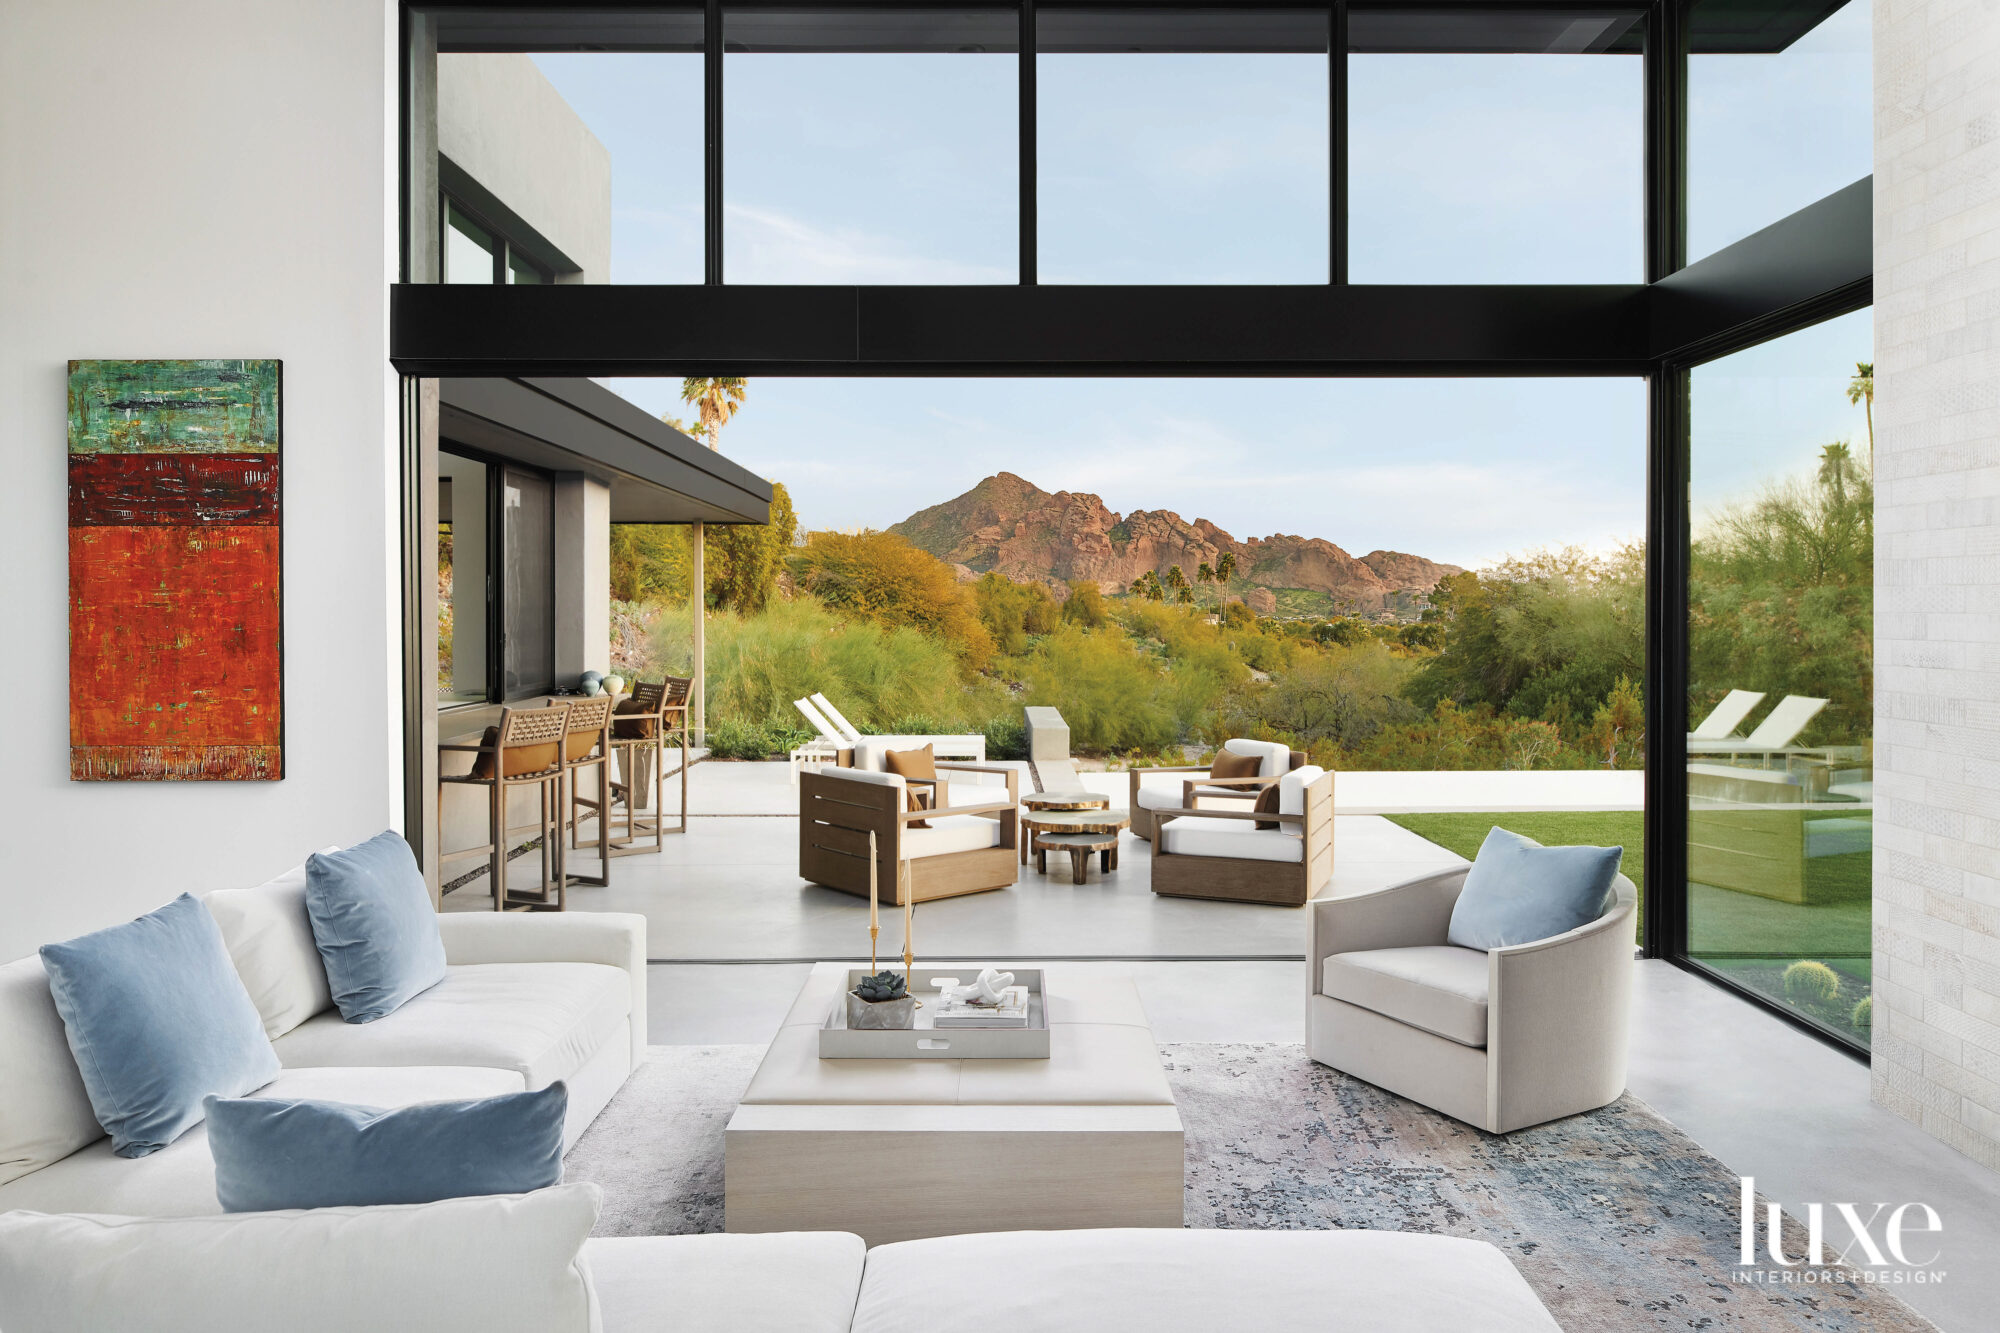 A living room with retractable floor-to-ceiling windows that open out to a patio.